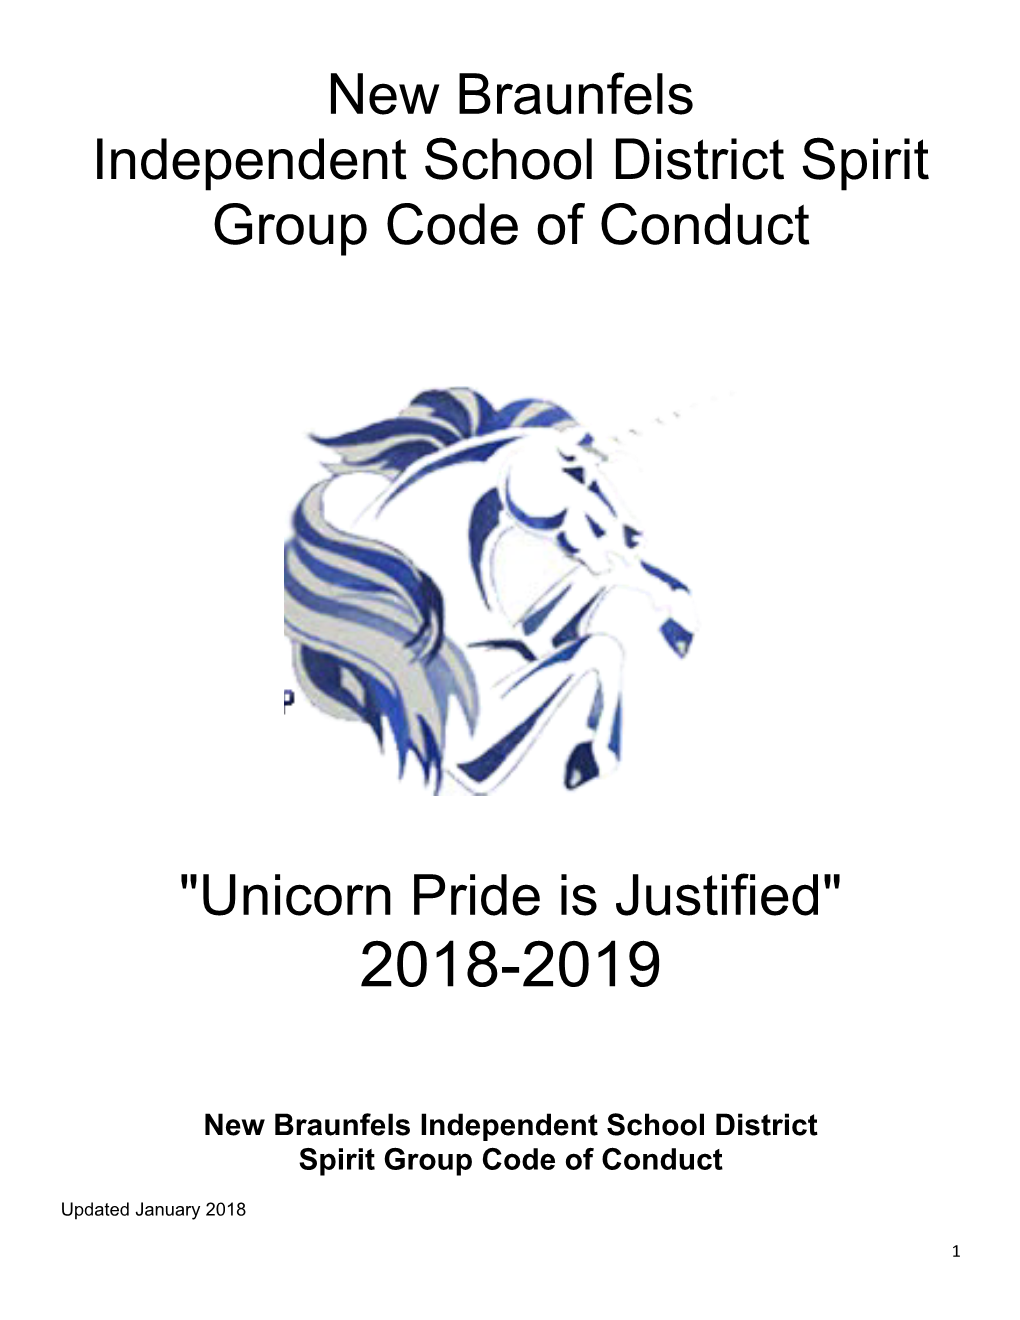 Independent School District Spirit Group Code of Conduct